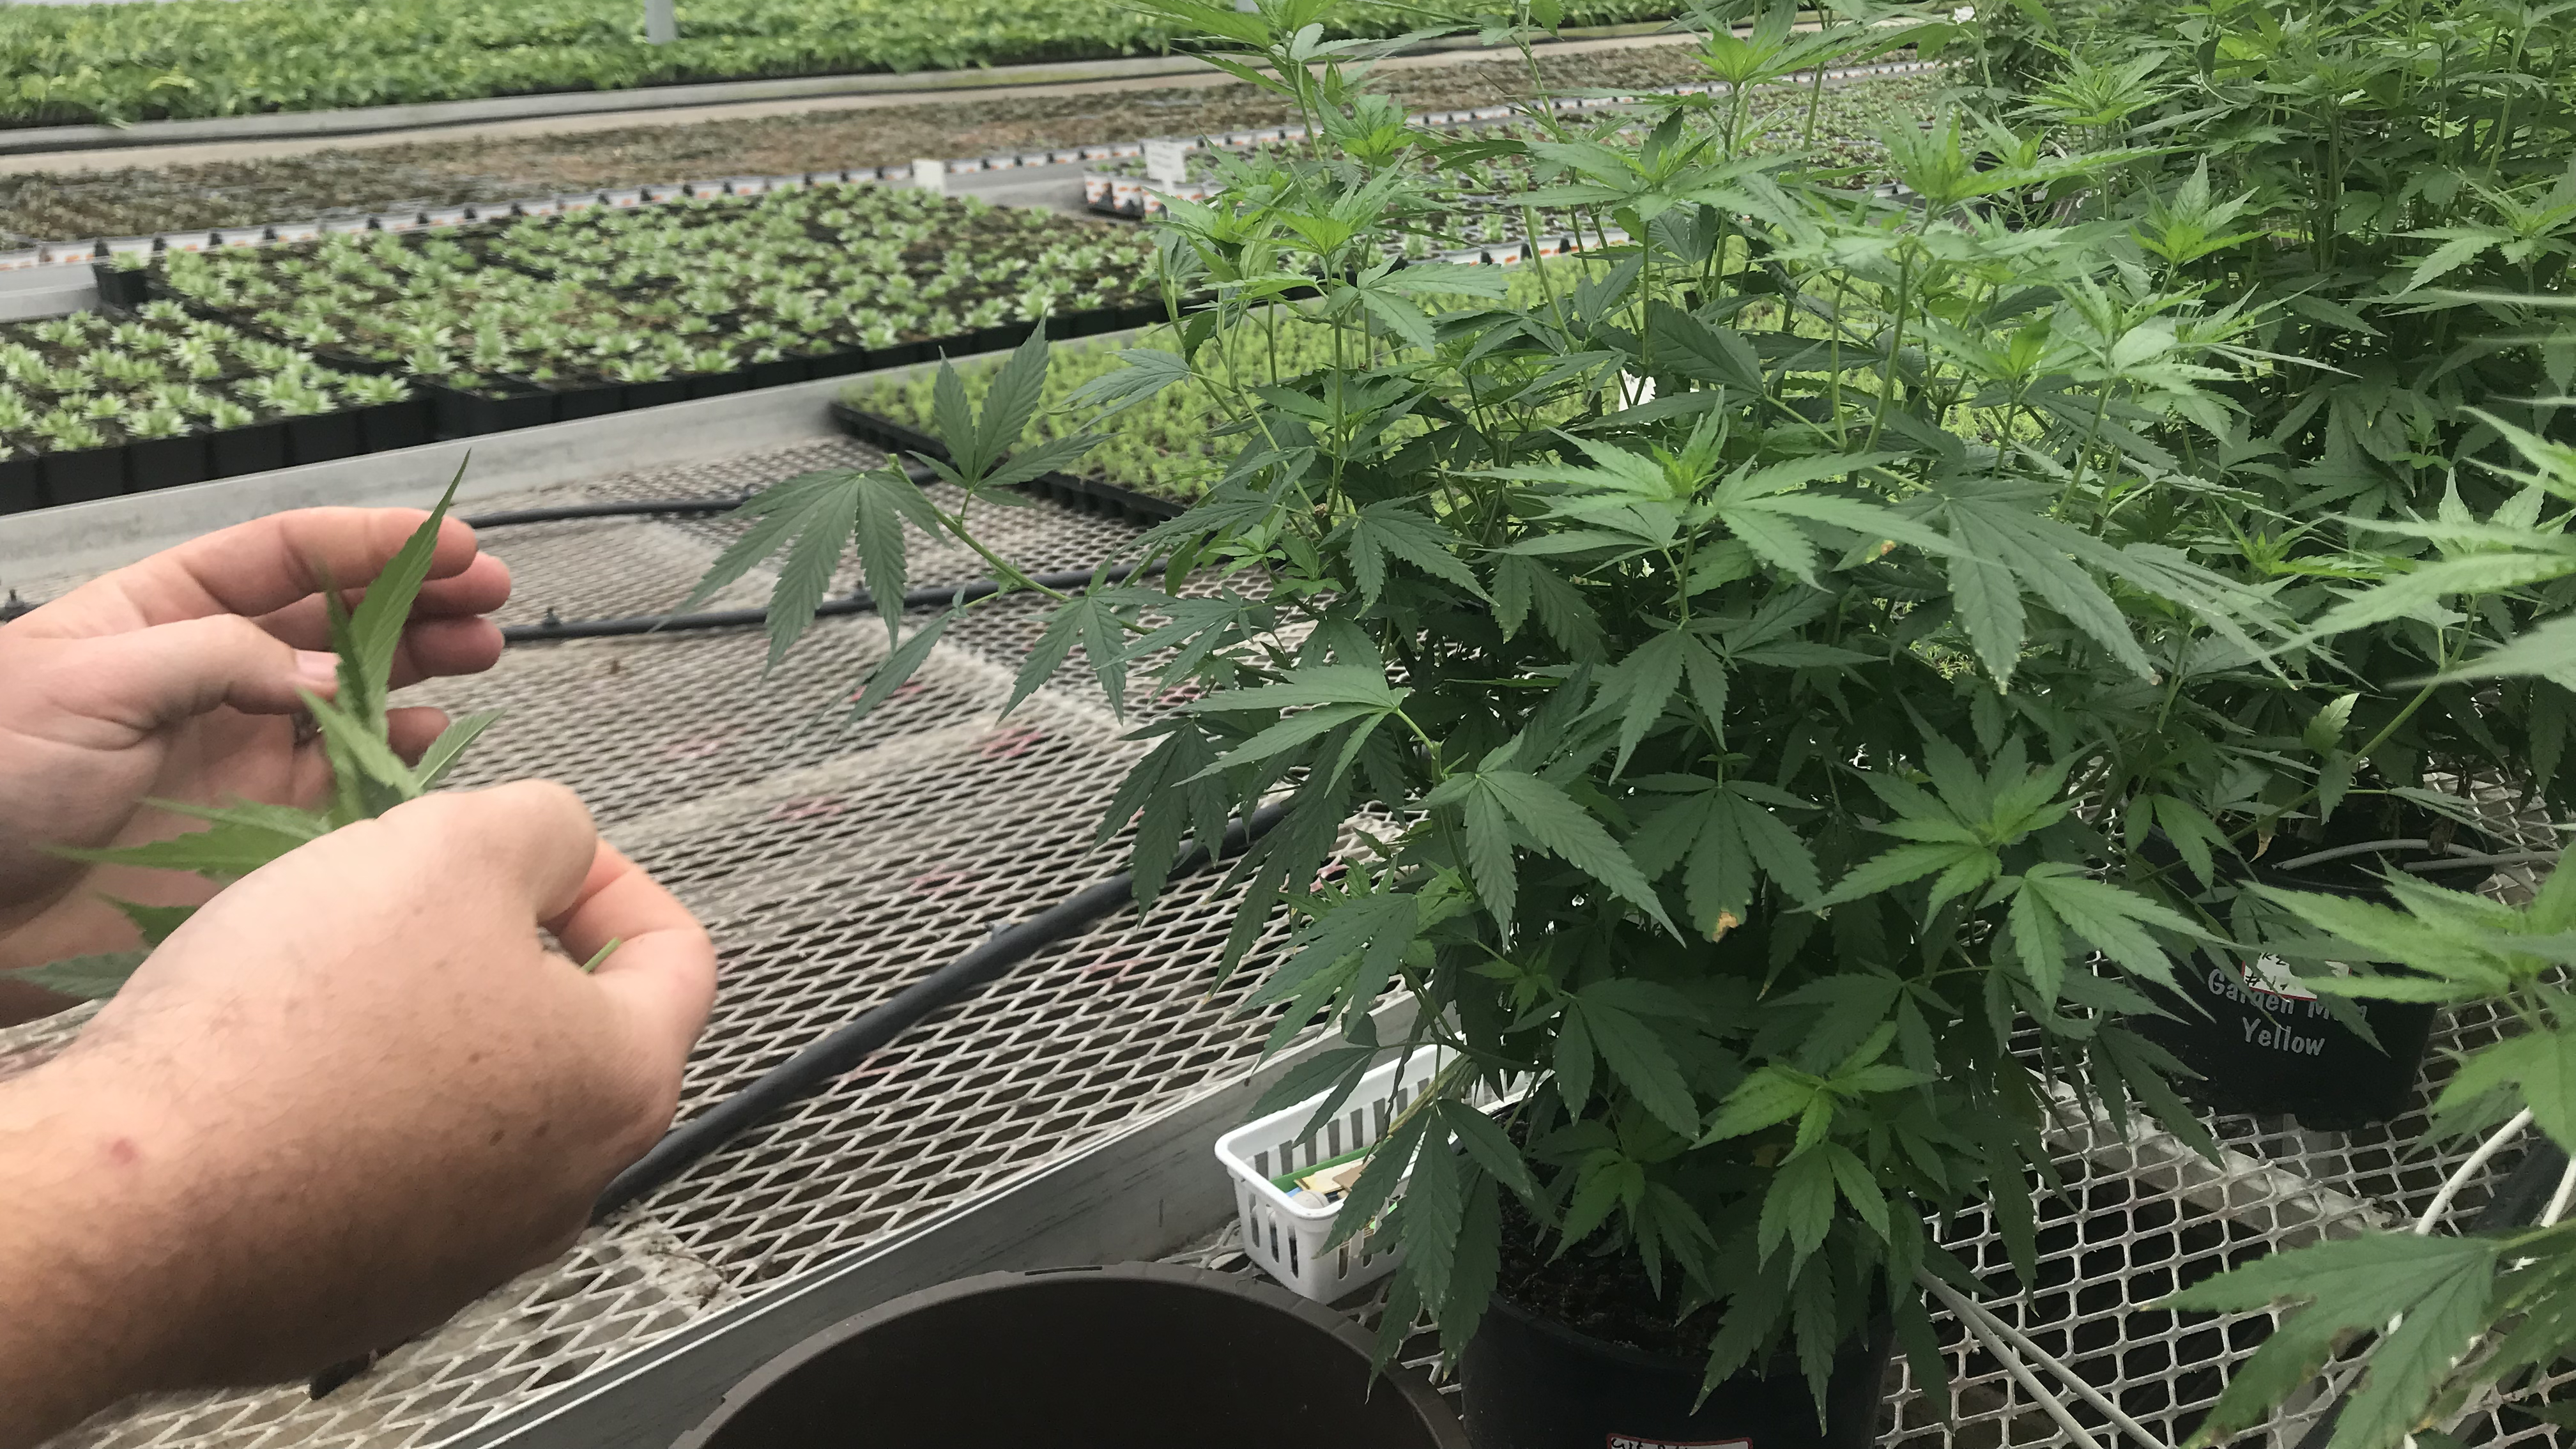 Jon Hegeman grows his hemp among other plants in a controlled greenhouse.